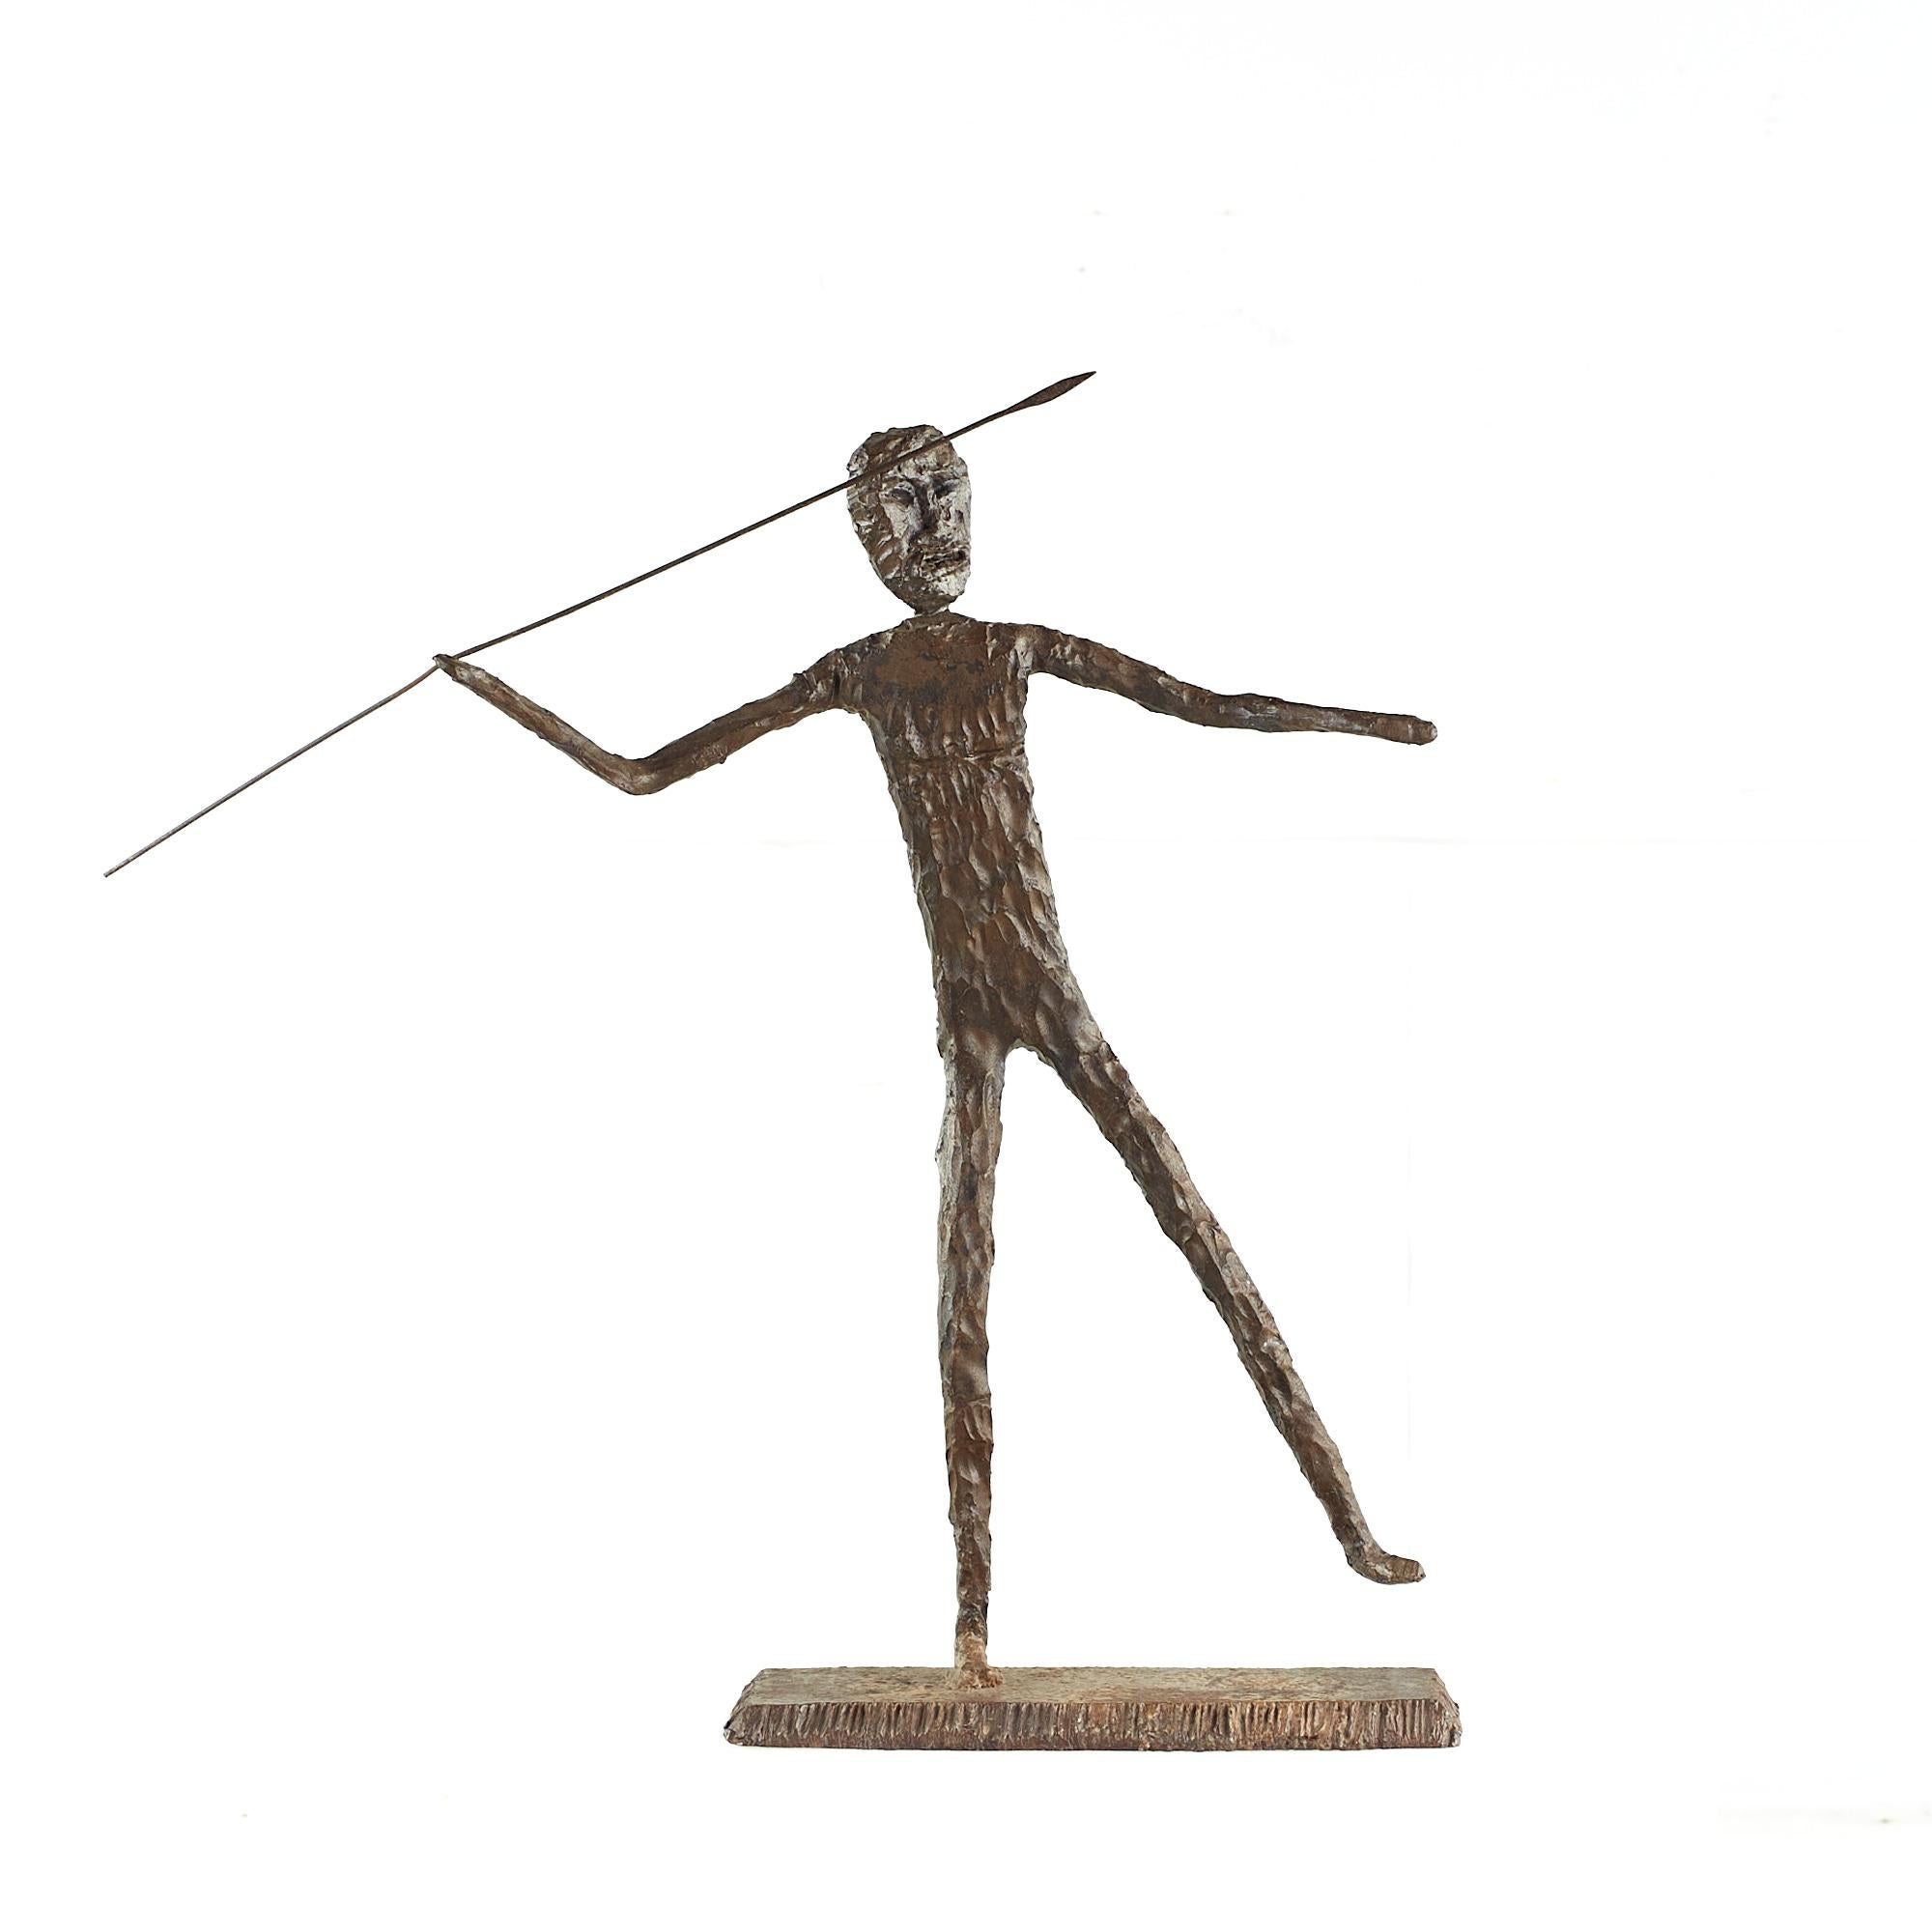 Brutalist mid century man throwing spear steel sculpture

This sculpture measures: 22 wide x 7 deep x 22 inches high


We take our photos in a controlled lighting studio to show as much detail as possible. We do not photoshop out blemishes.